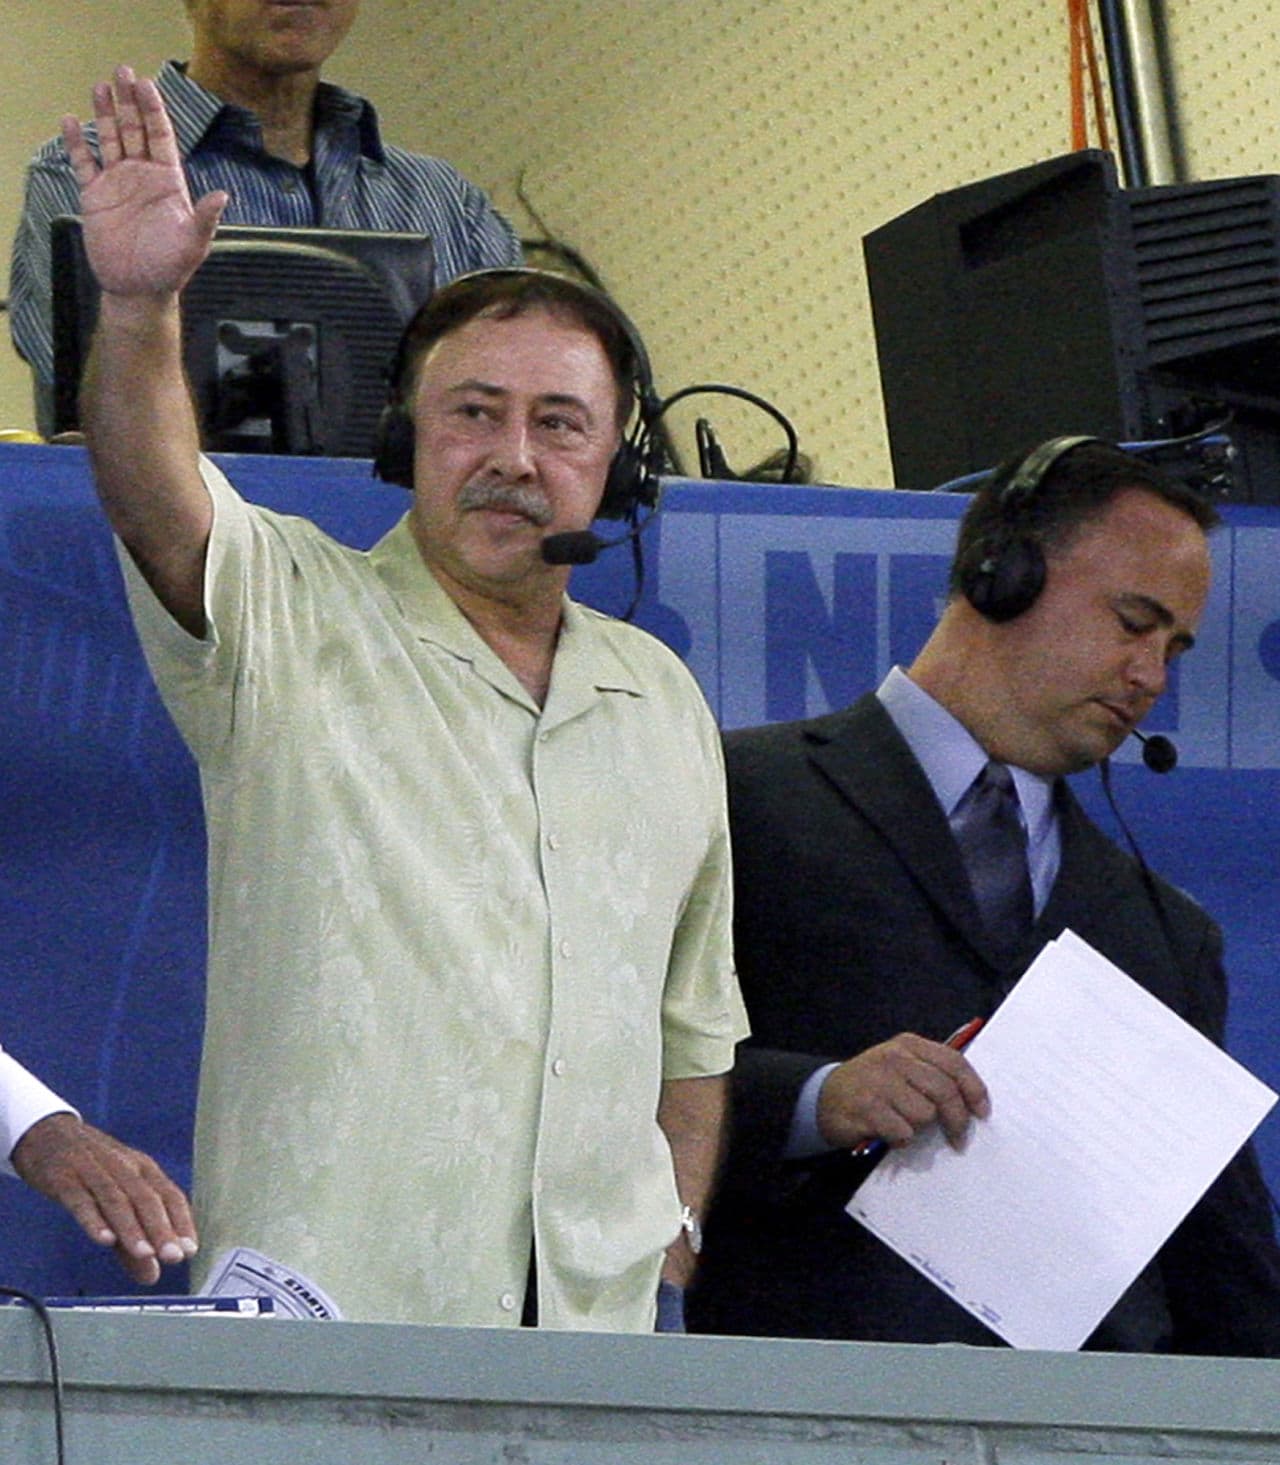 In this Aug. 12, 2009 file photo, Jerry Remy waves to the crowd from the television broadcast booth at Fenway Park. Don Orsillo is pictured to his right. (Elise Amendola/ AP)